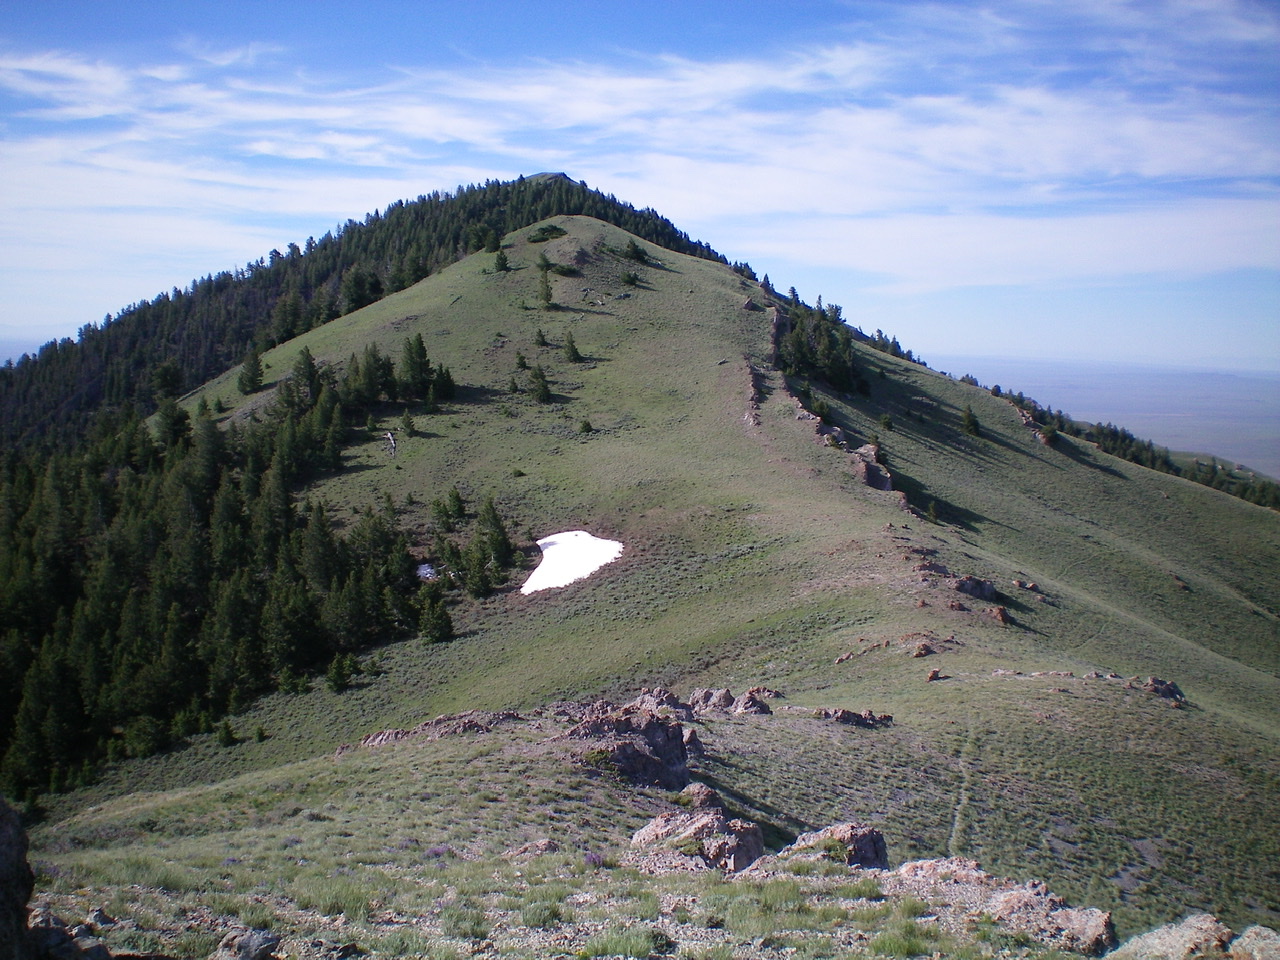 The North Ridge of Peak 8383 as viewed from the saddle at the base of the ridge. Livingston Douglas Photo 